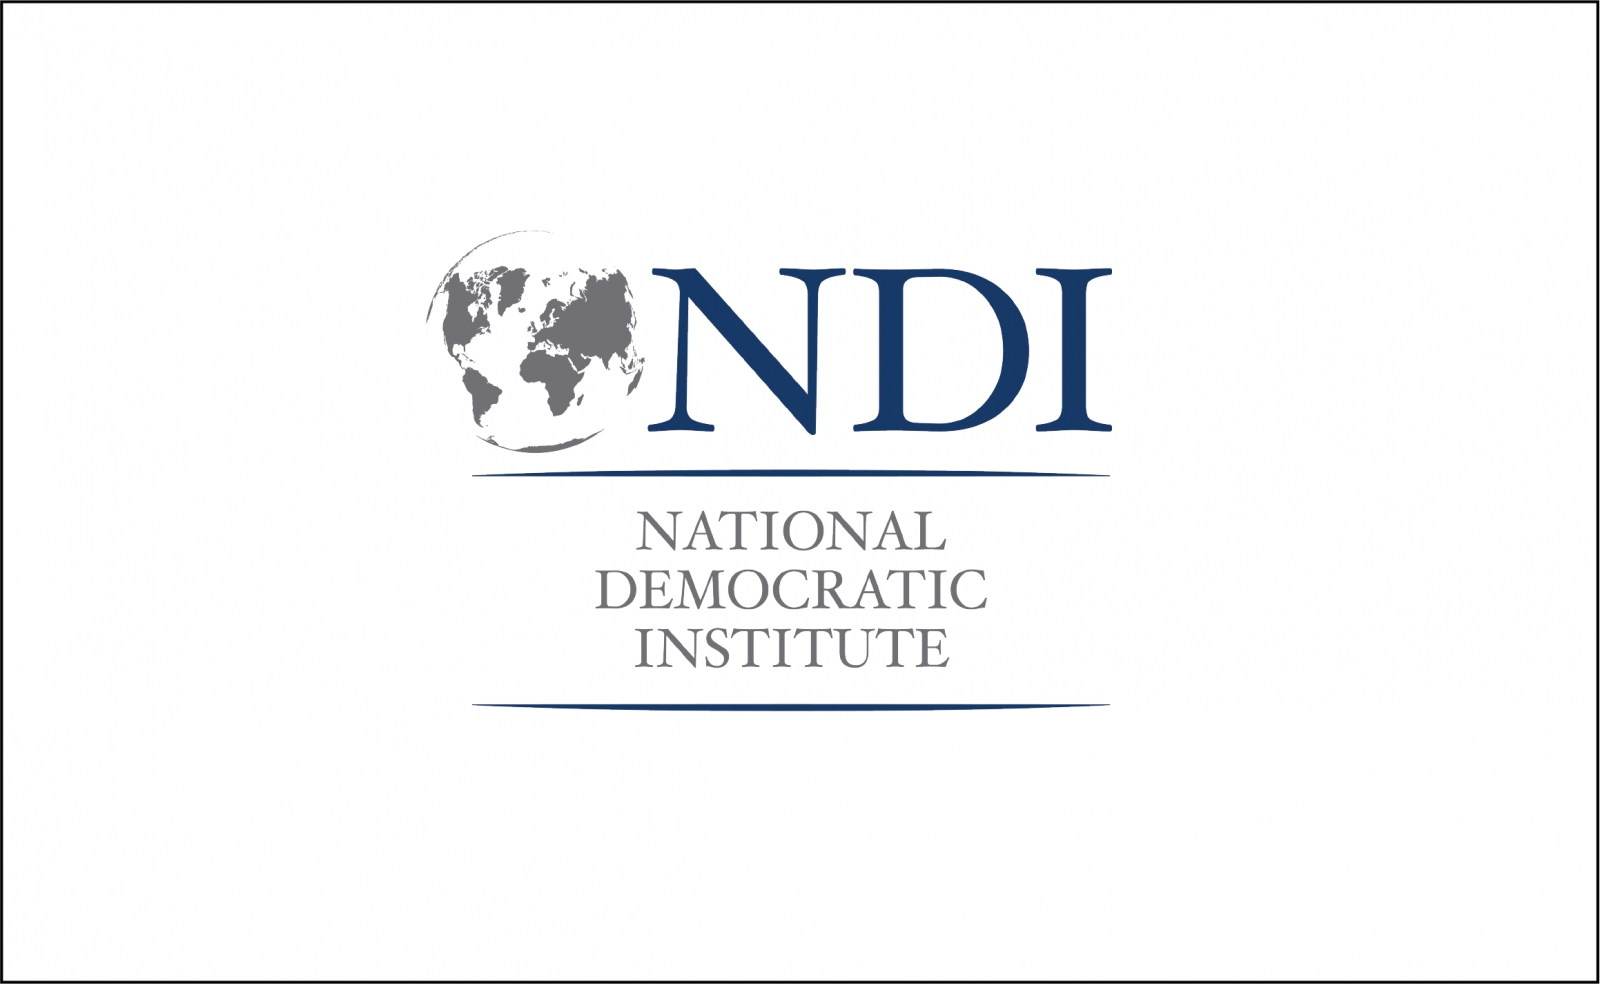 NDI Condemns Sham Referendums in Ukraine that Violate Rule of Law and International Election Standards